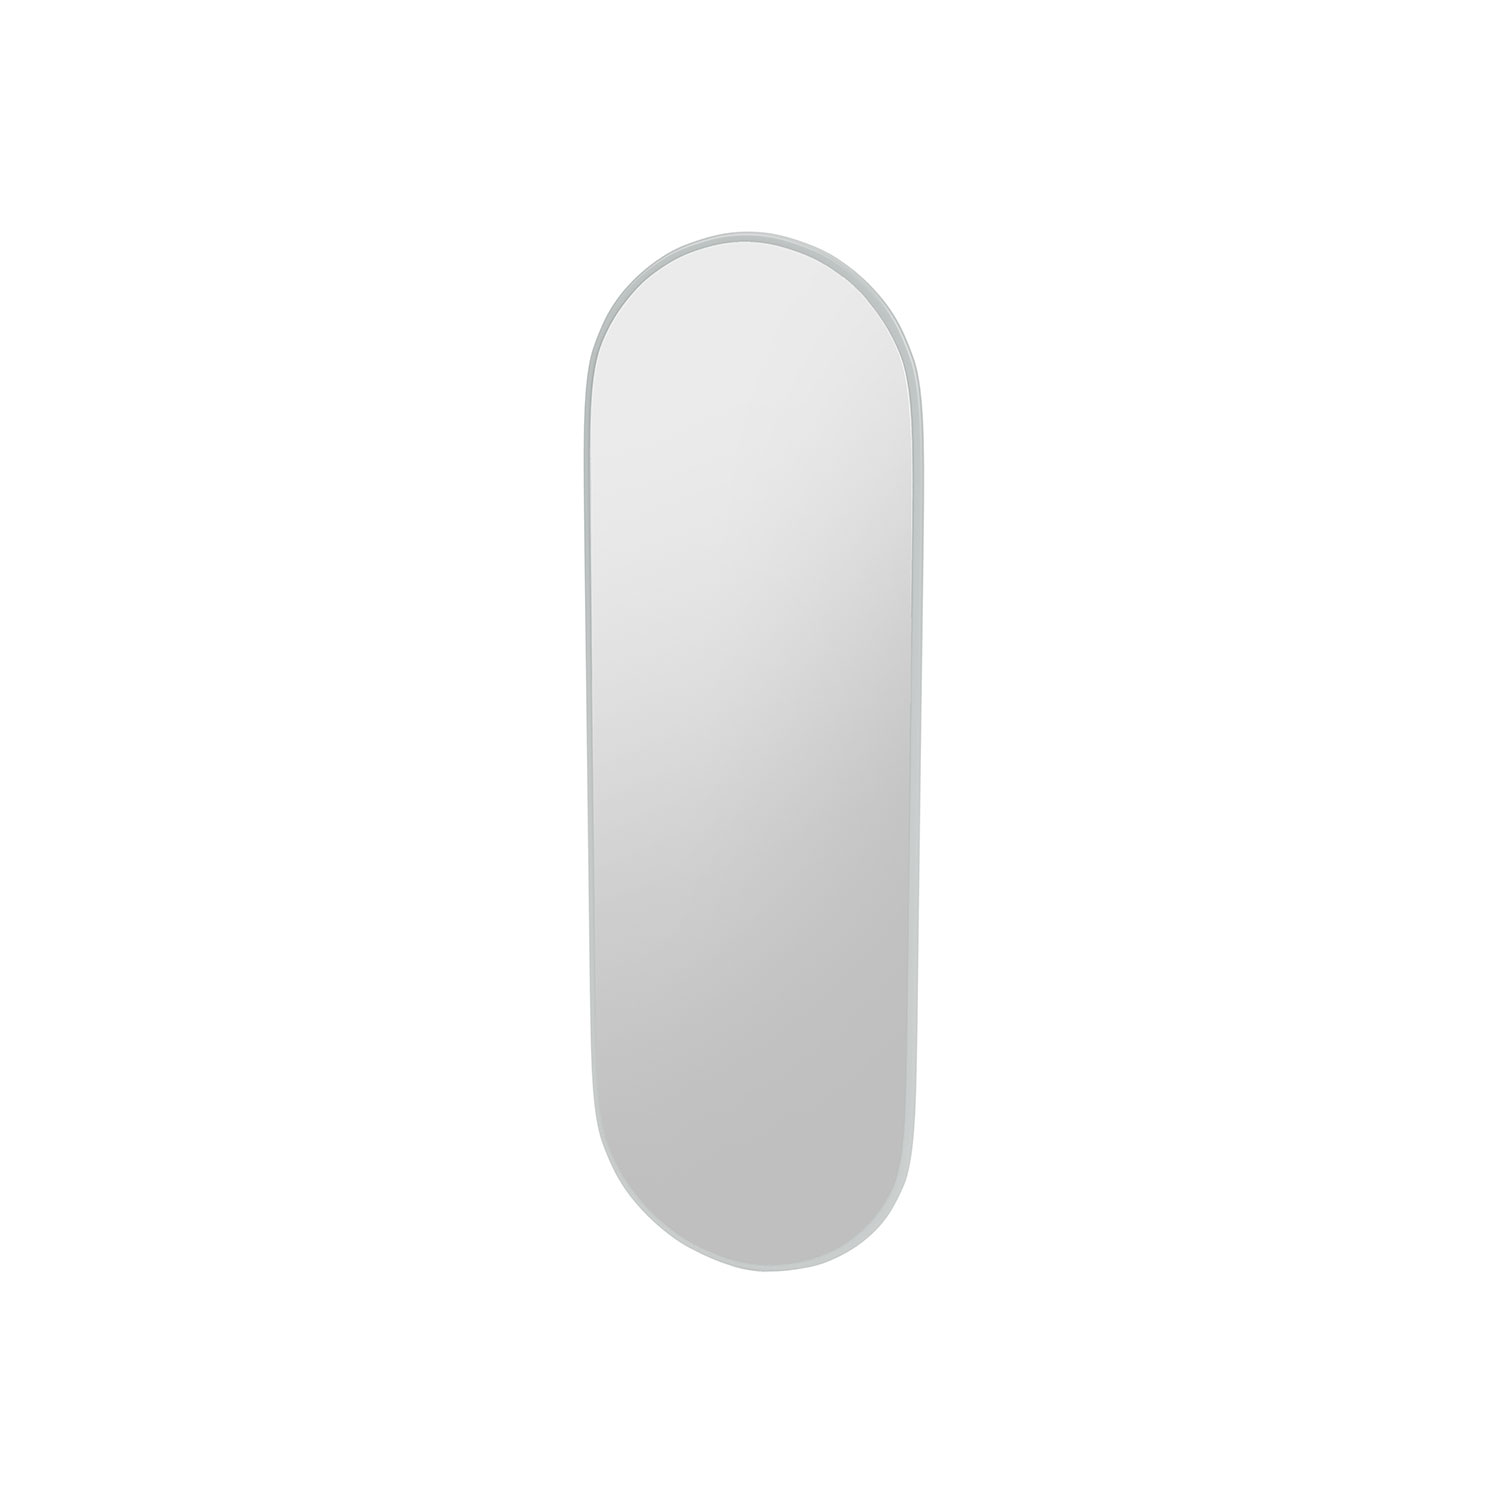 FIGURE oval mirror, Oyster